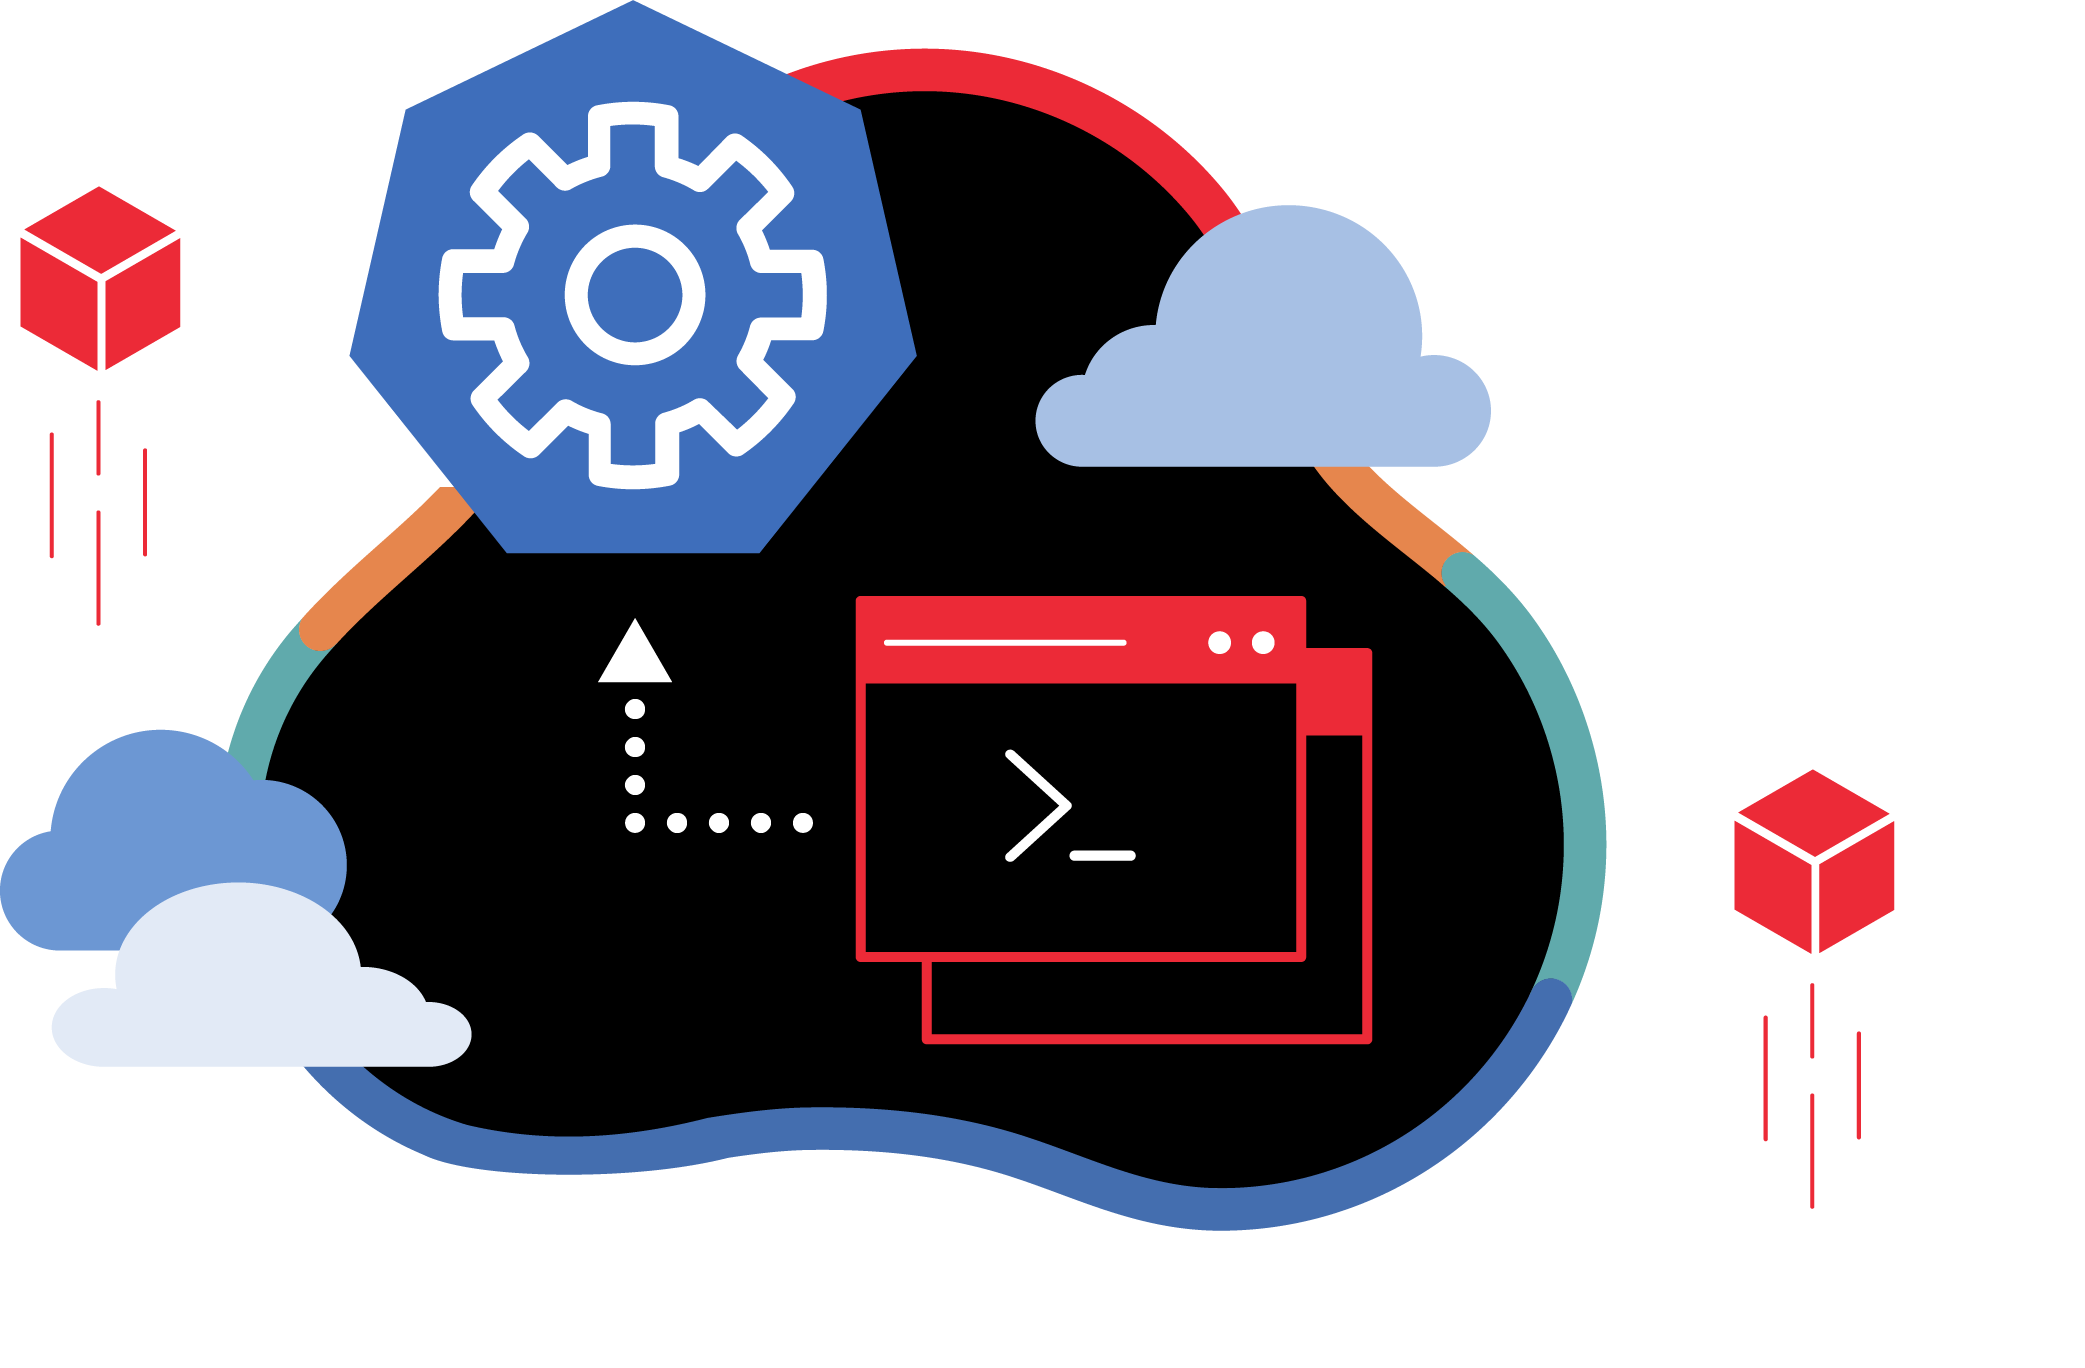 Migrate and deploy Cloud Foundry applications to Kubernetes